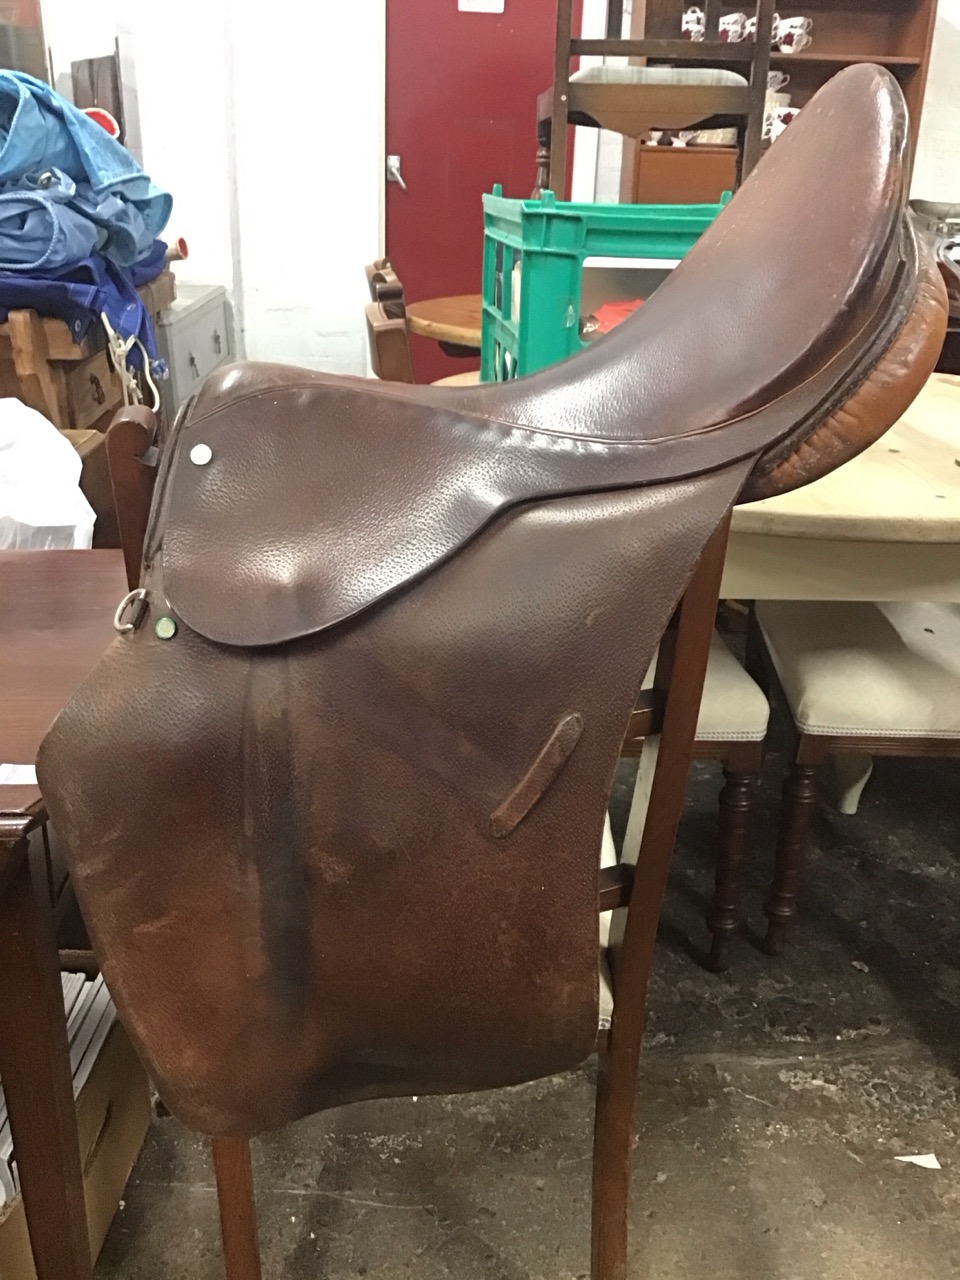 A leather general purpose saddle by Eldonian Brooks Ltd; two lunge whips; four riding crops; a - Image 2 of 3